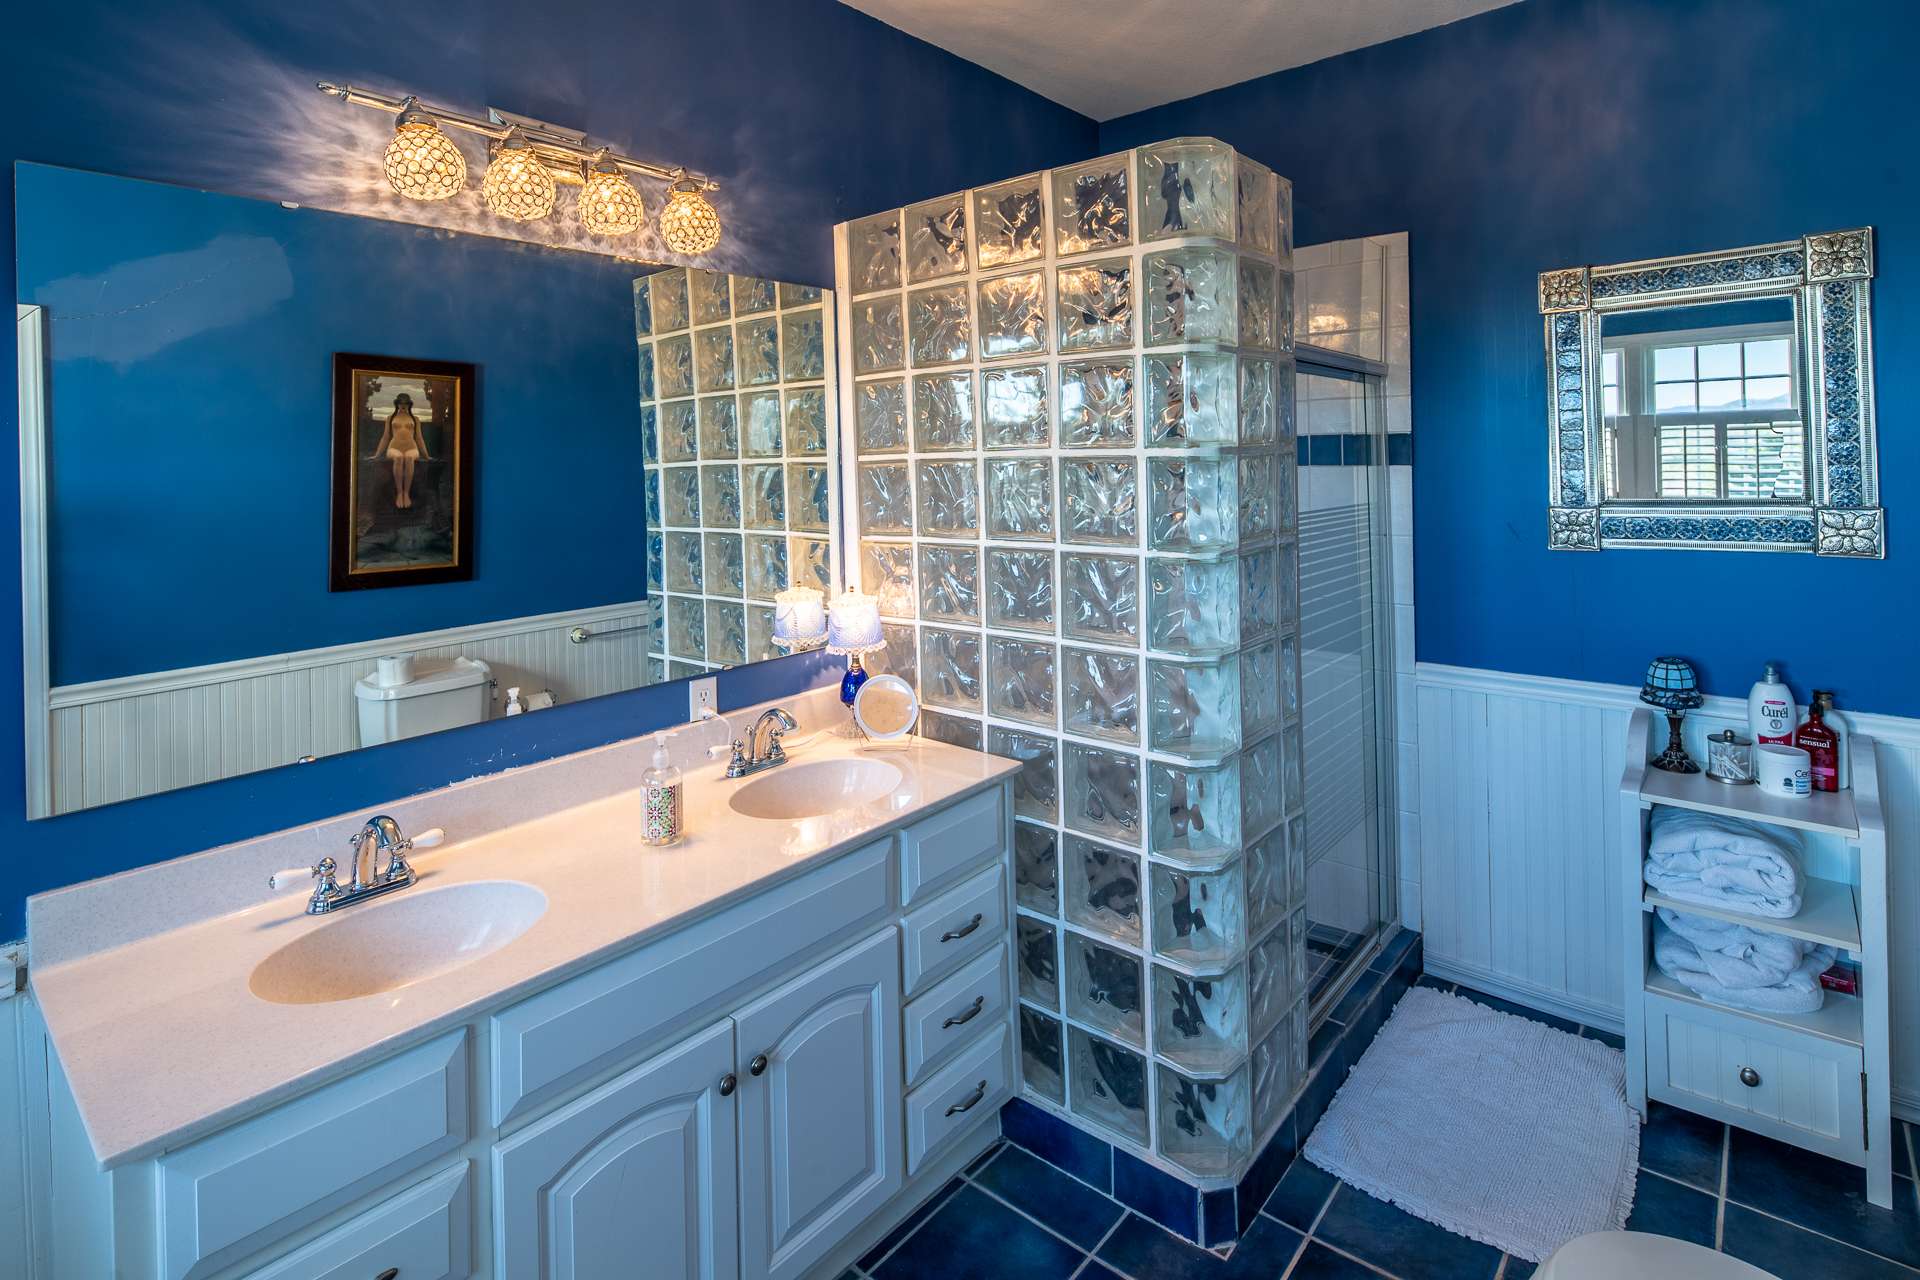 The master bath offers a double vanity, a claw foot tub, and a walk-in  shower.